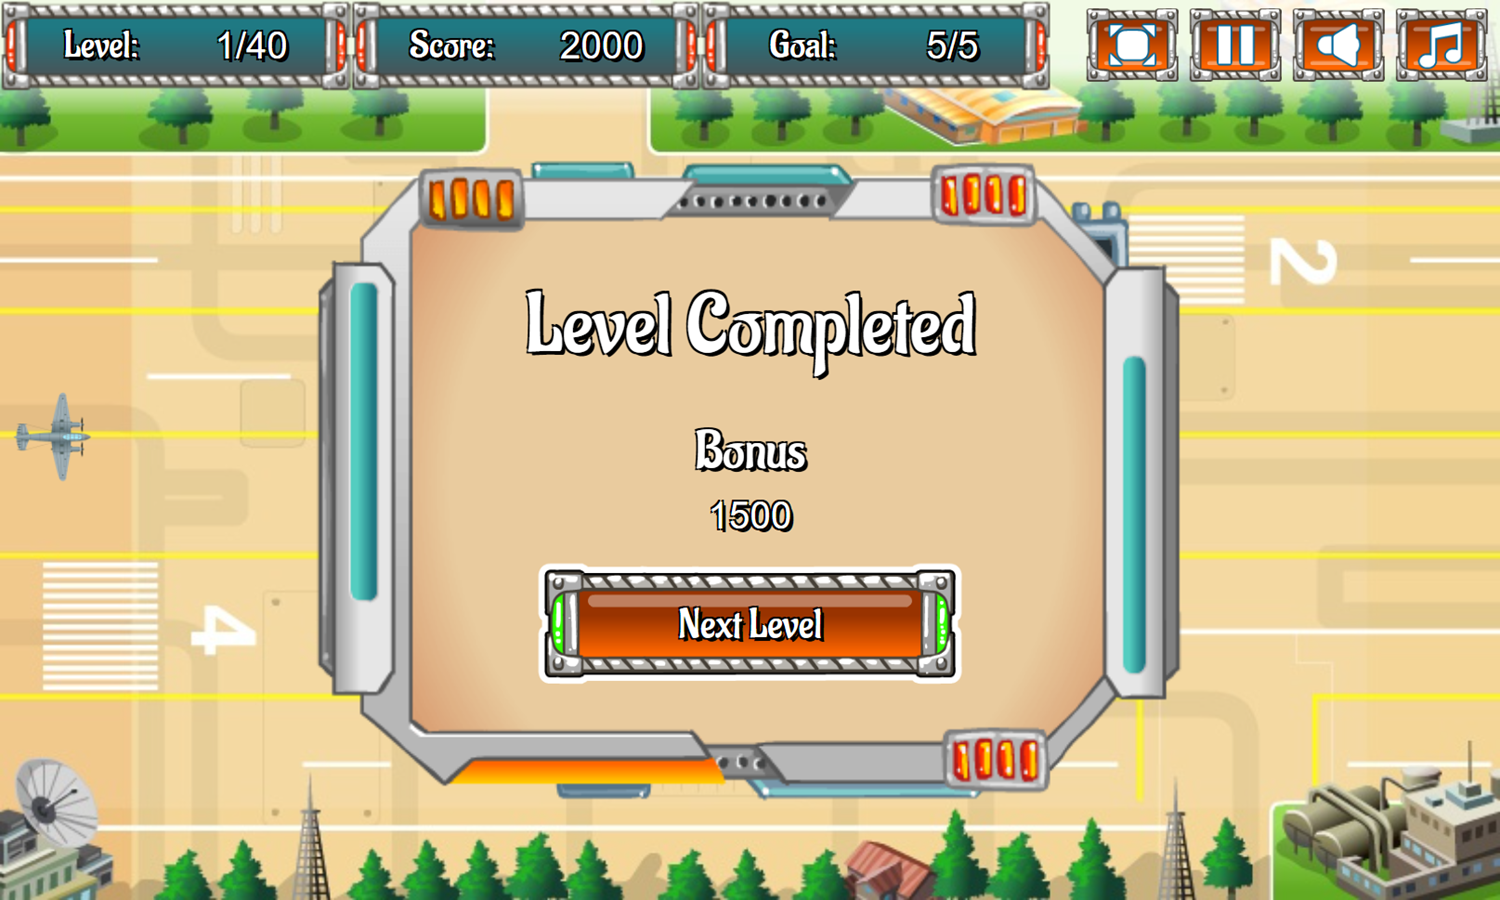 Airport Management 2 Game Level Completed Screenshot.